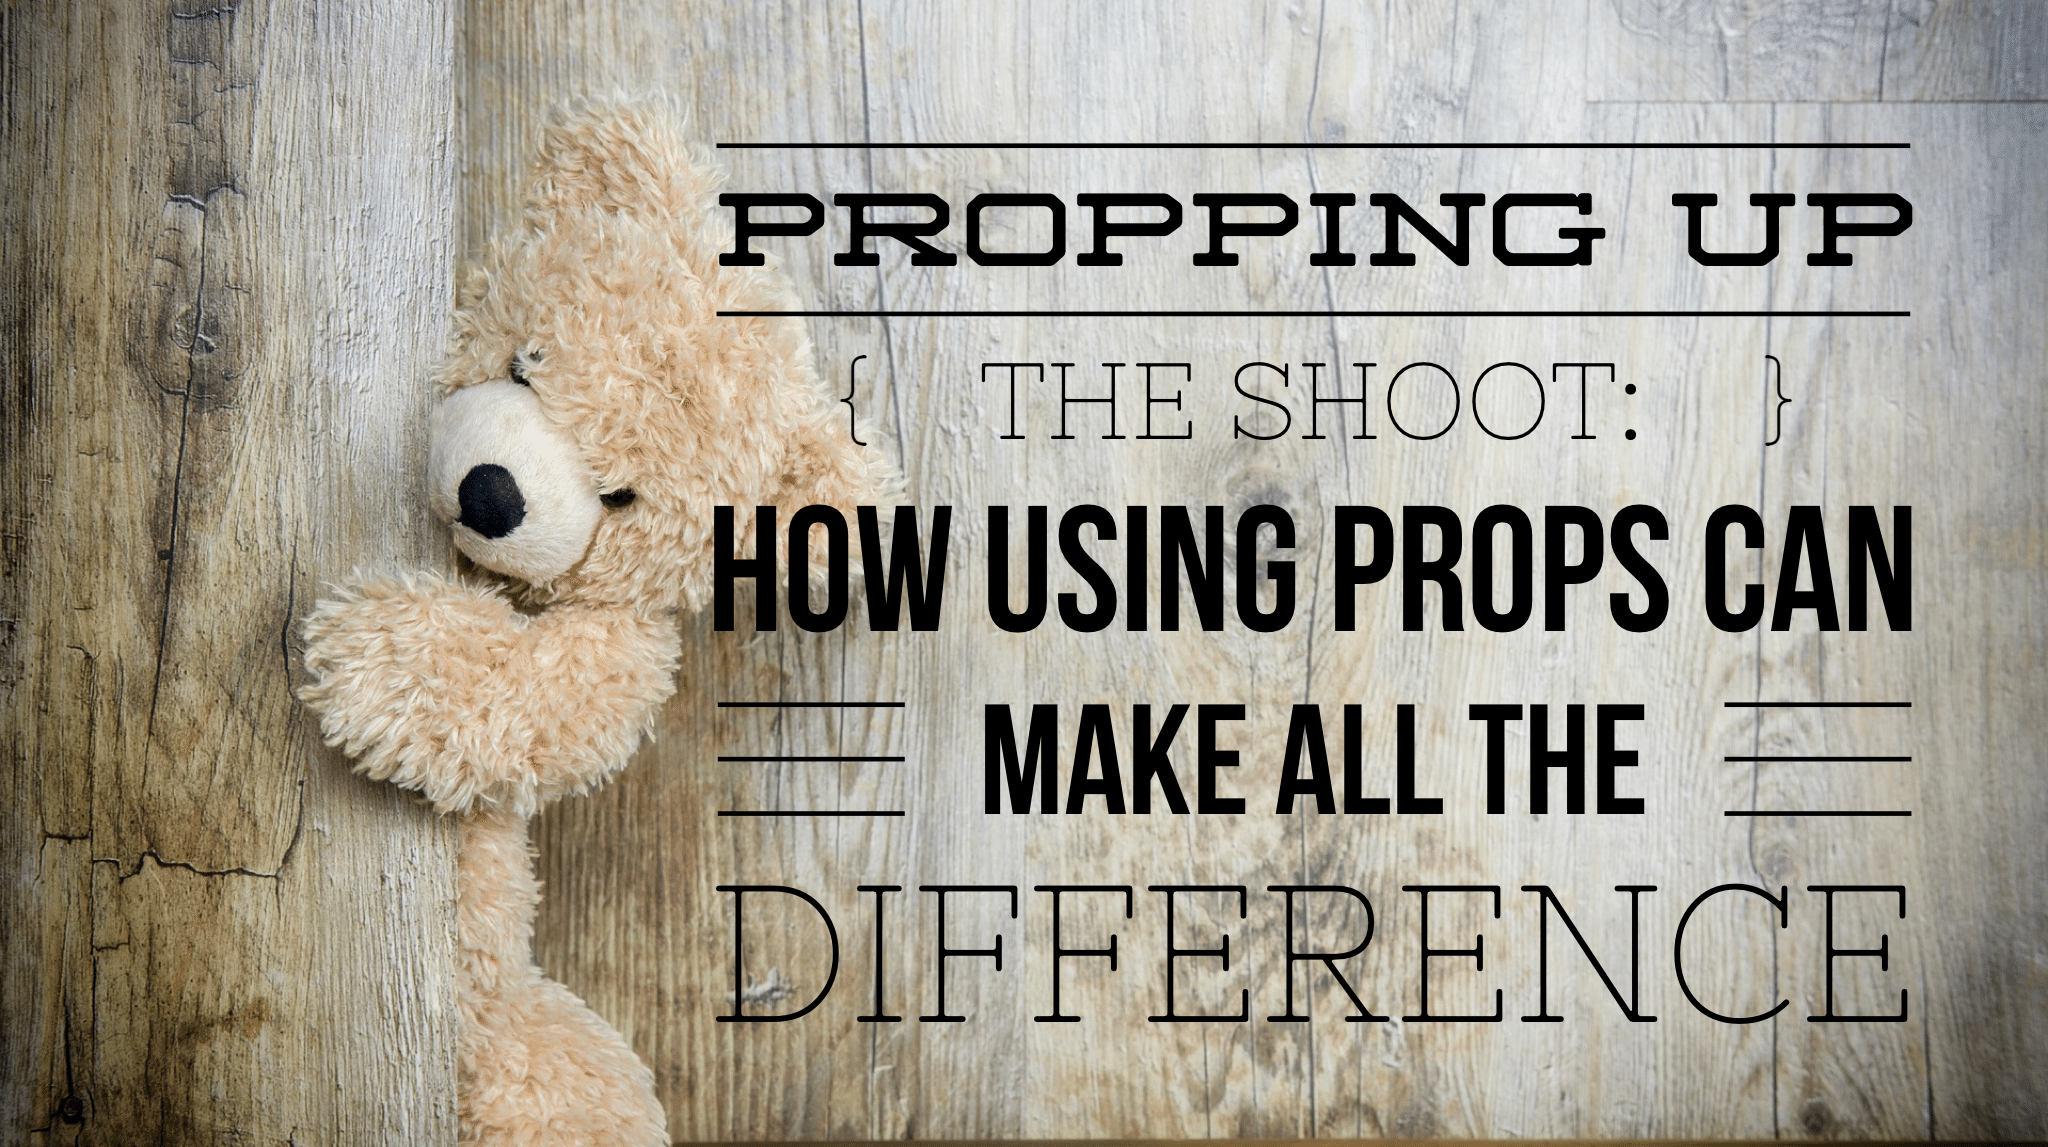 Propping up the shoot: how using props can make all the difference